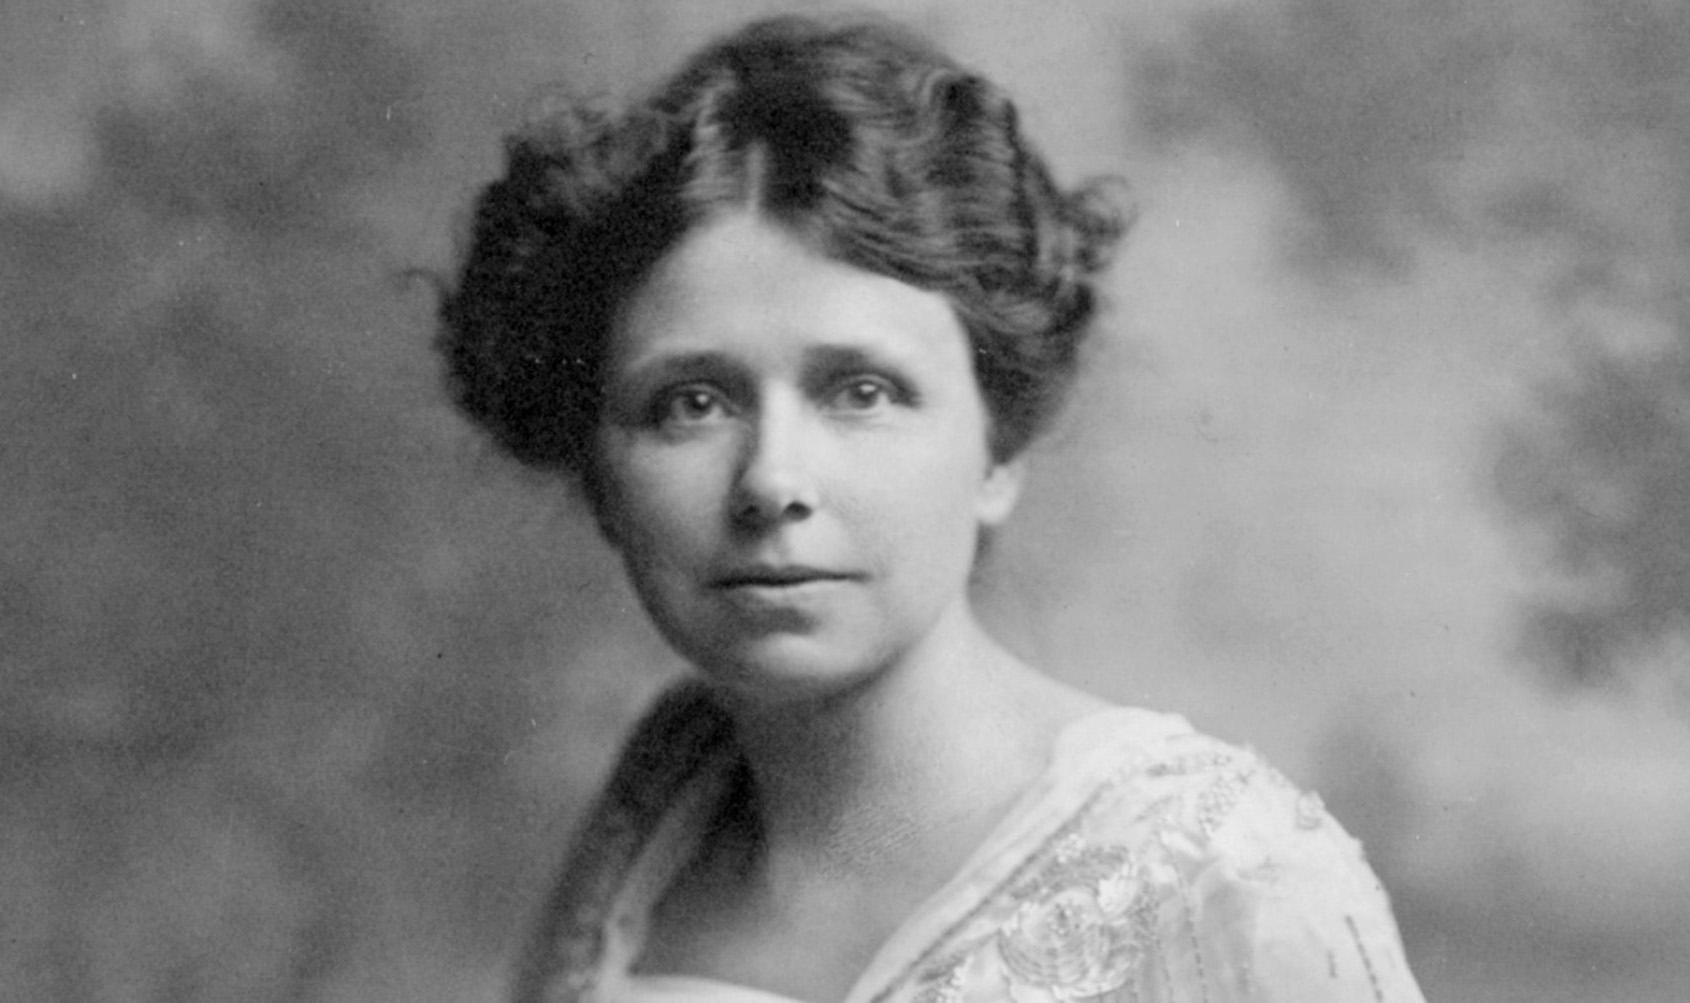 Hattie Ophelia Caraway, the first elected United States Senator